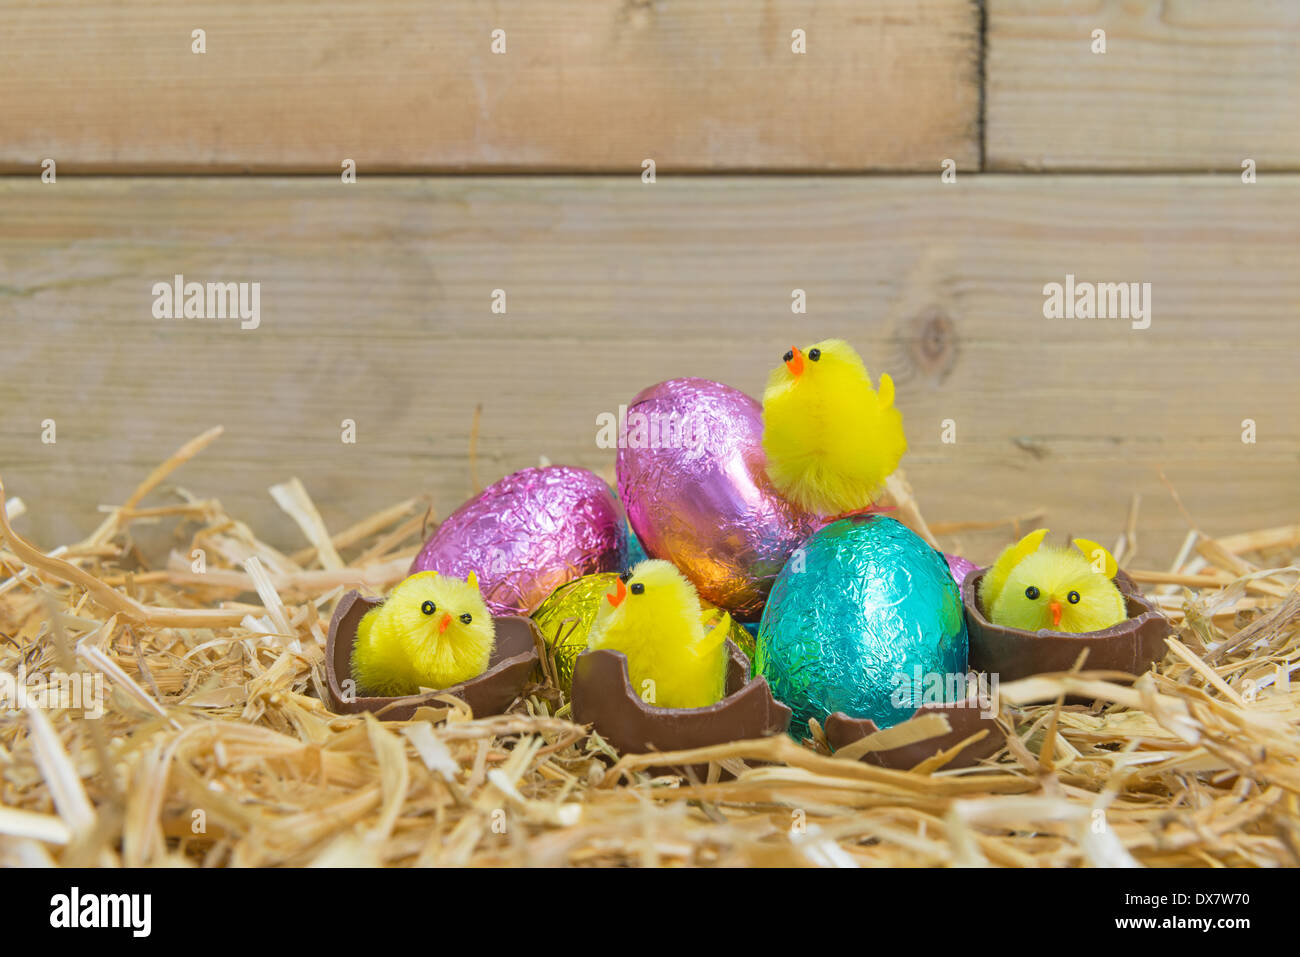 Toy Easter chicks hatching from chocolate eggs in a straw nest. Stock Photo